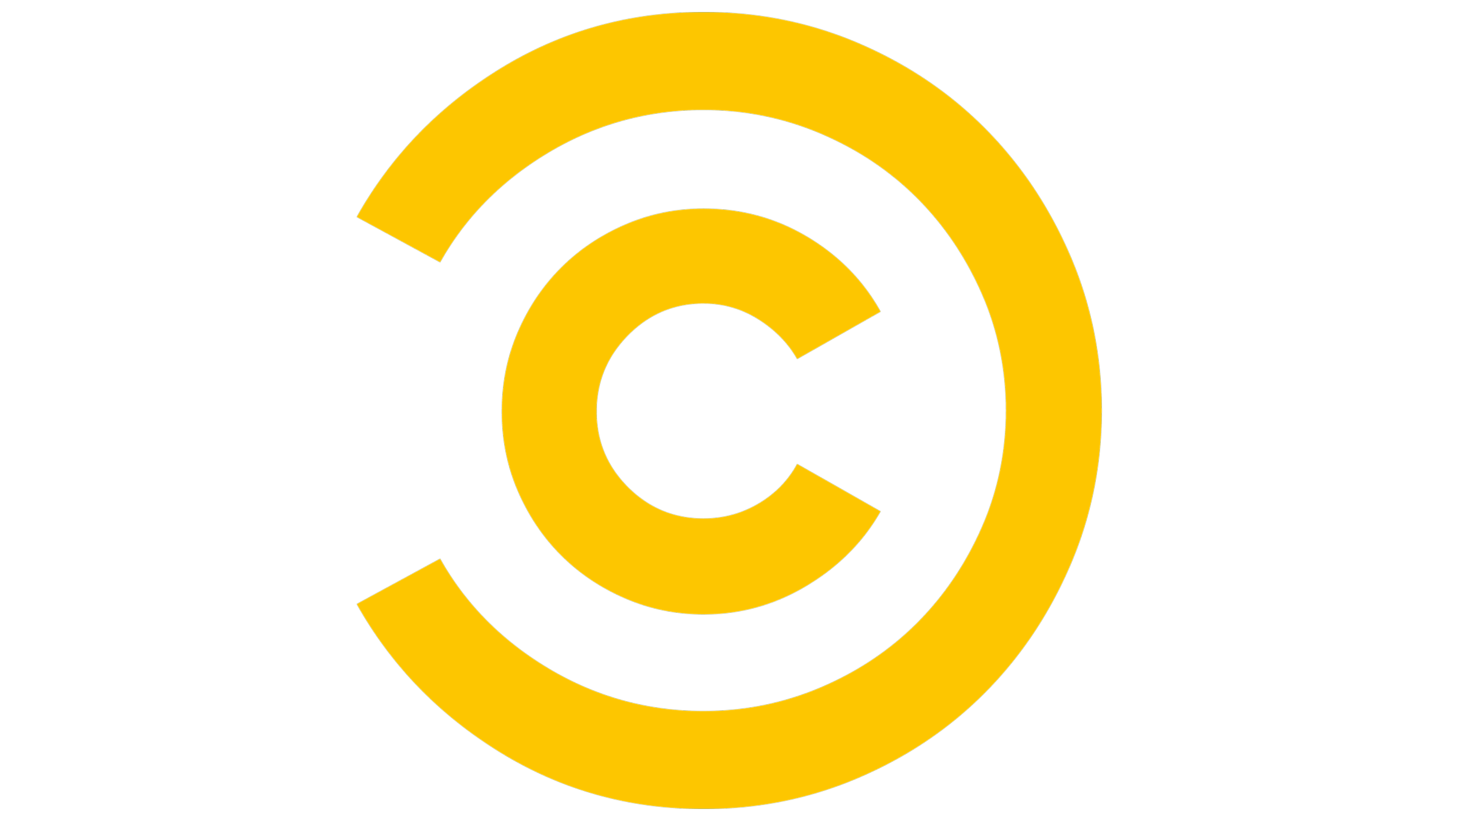 Comedy central productions logo